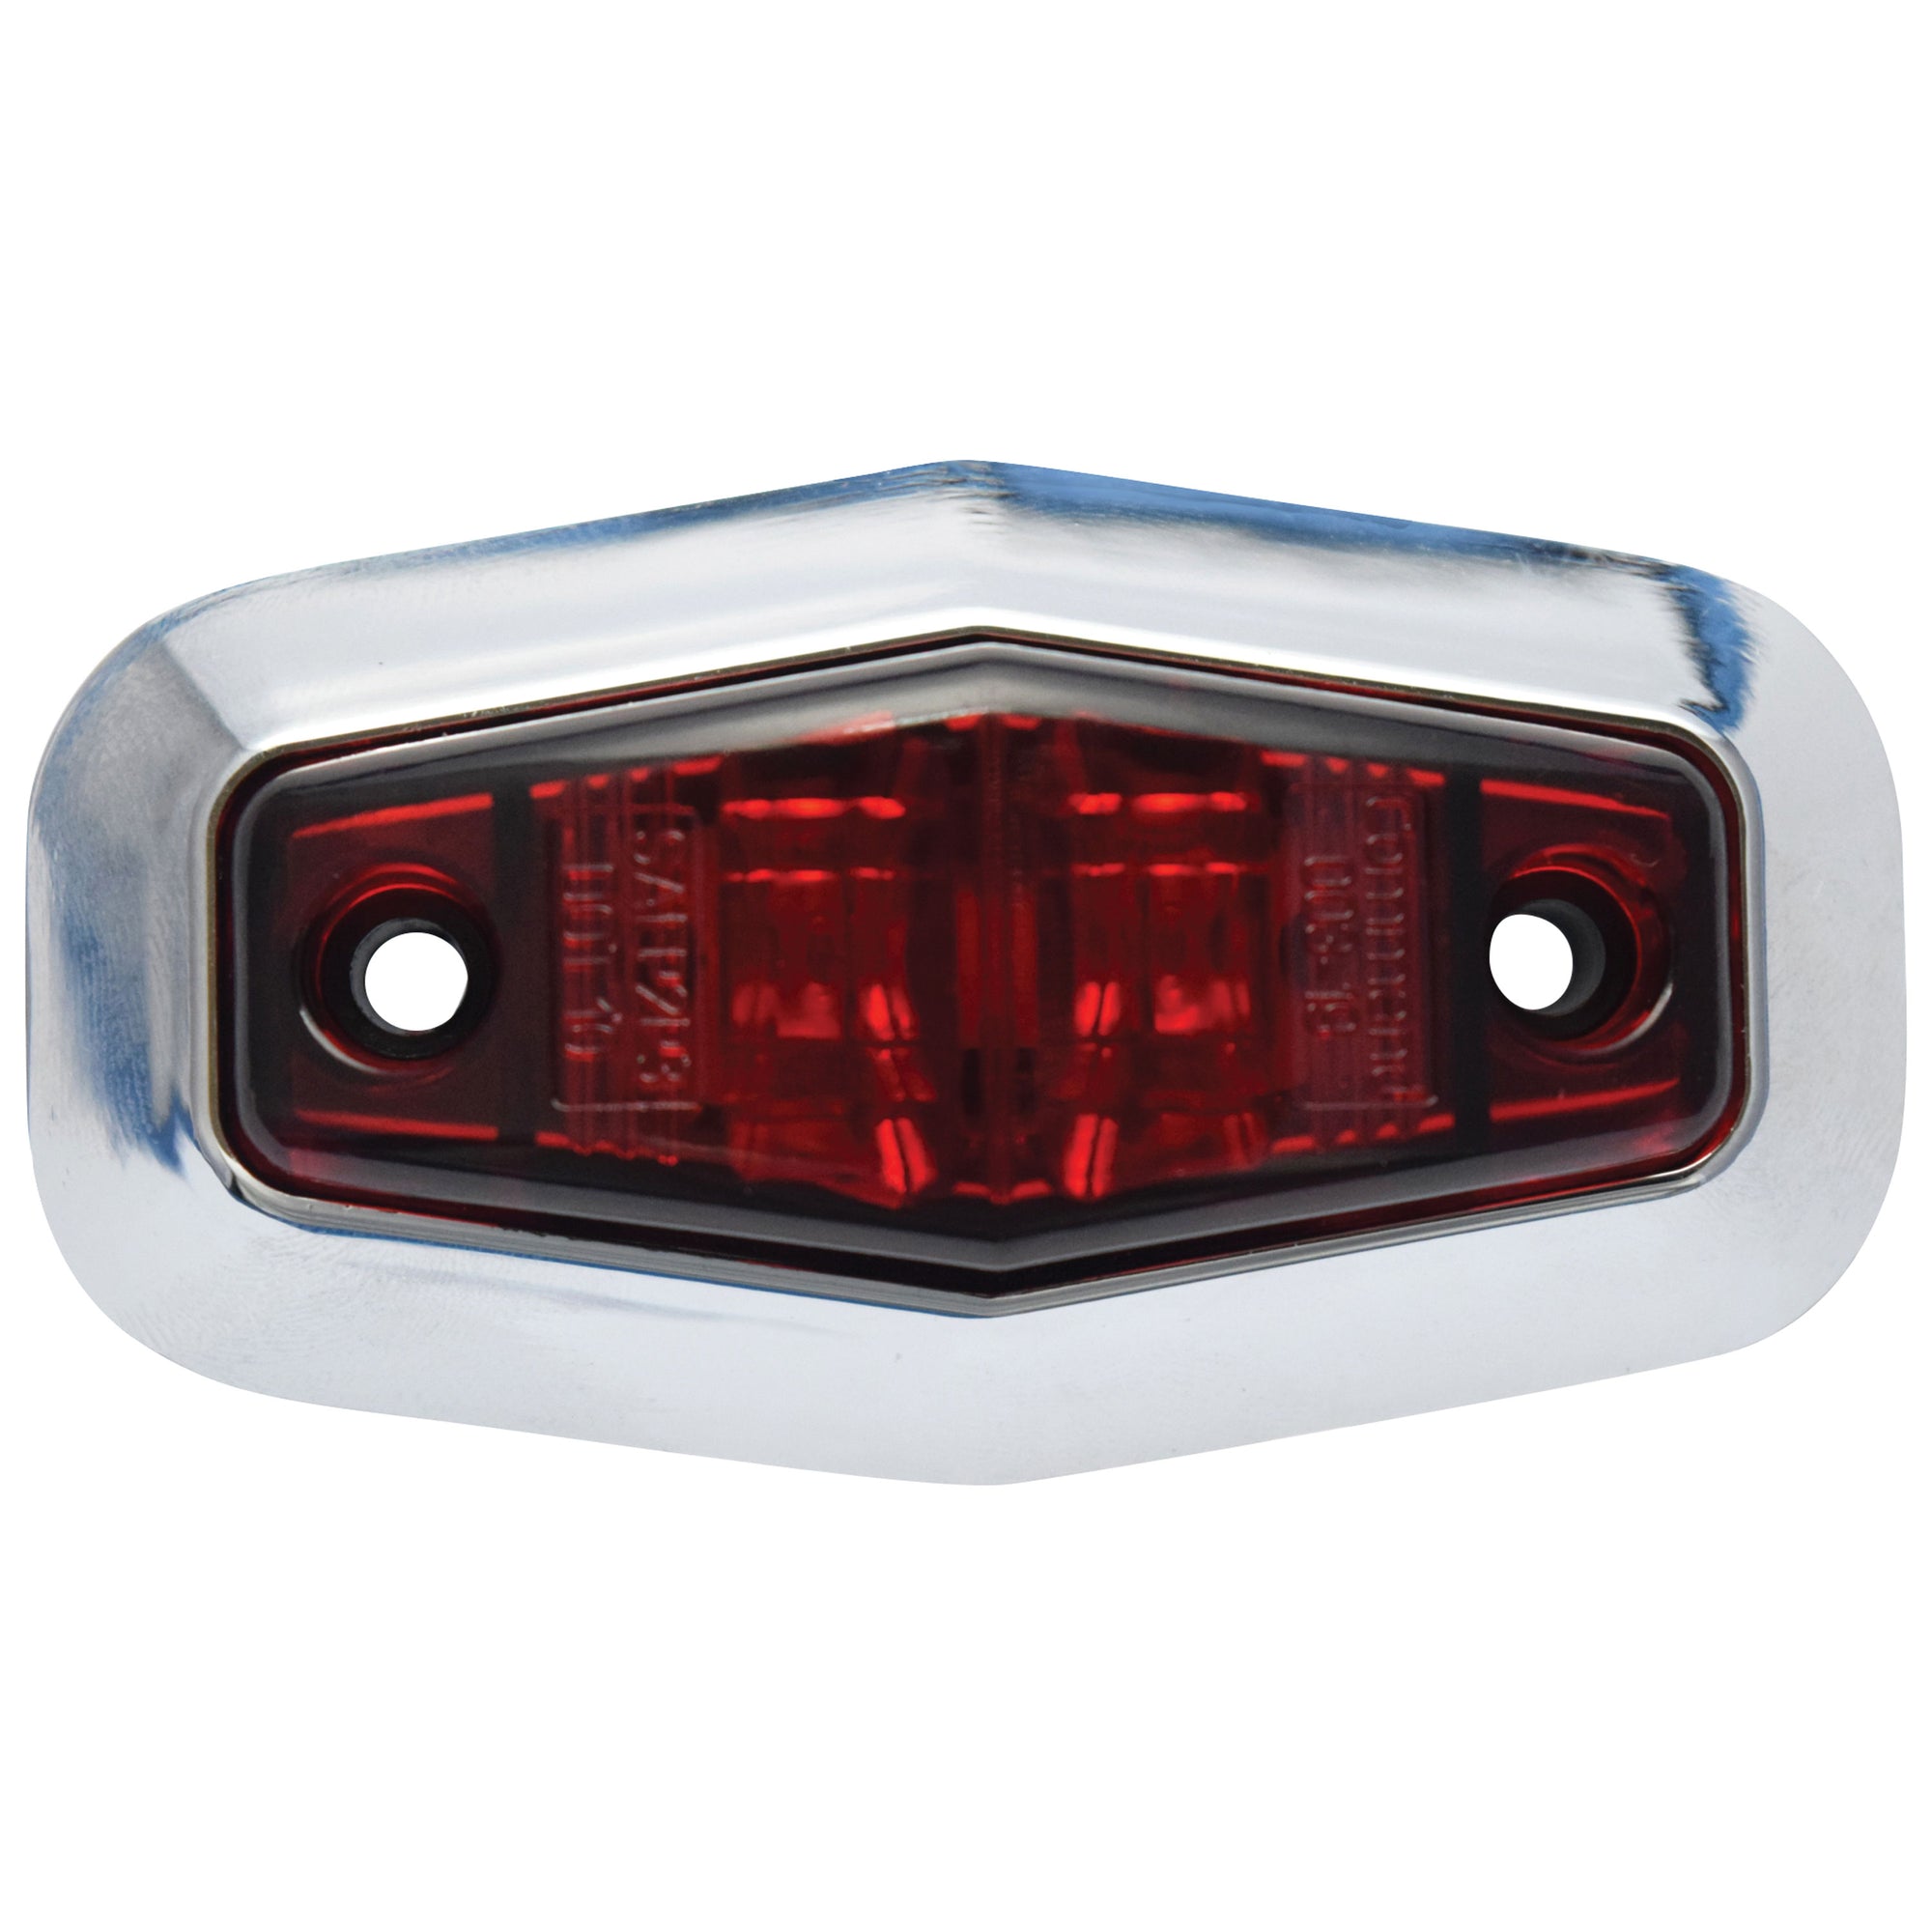 Fasteners Unlimited 003-19R LED Clearance Light Kit With Chrome Ring - Red, 3.25 in. L x 1.75 in. H